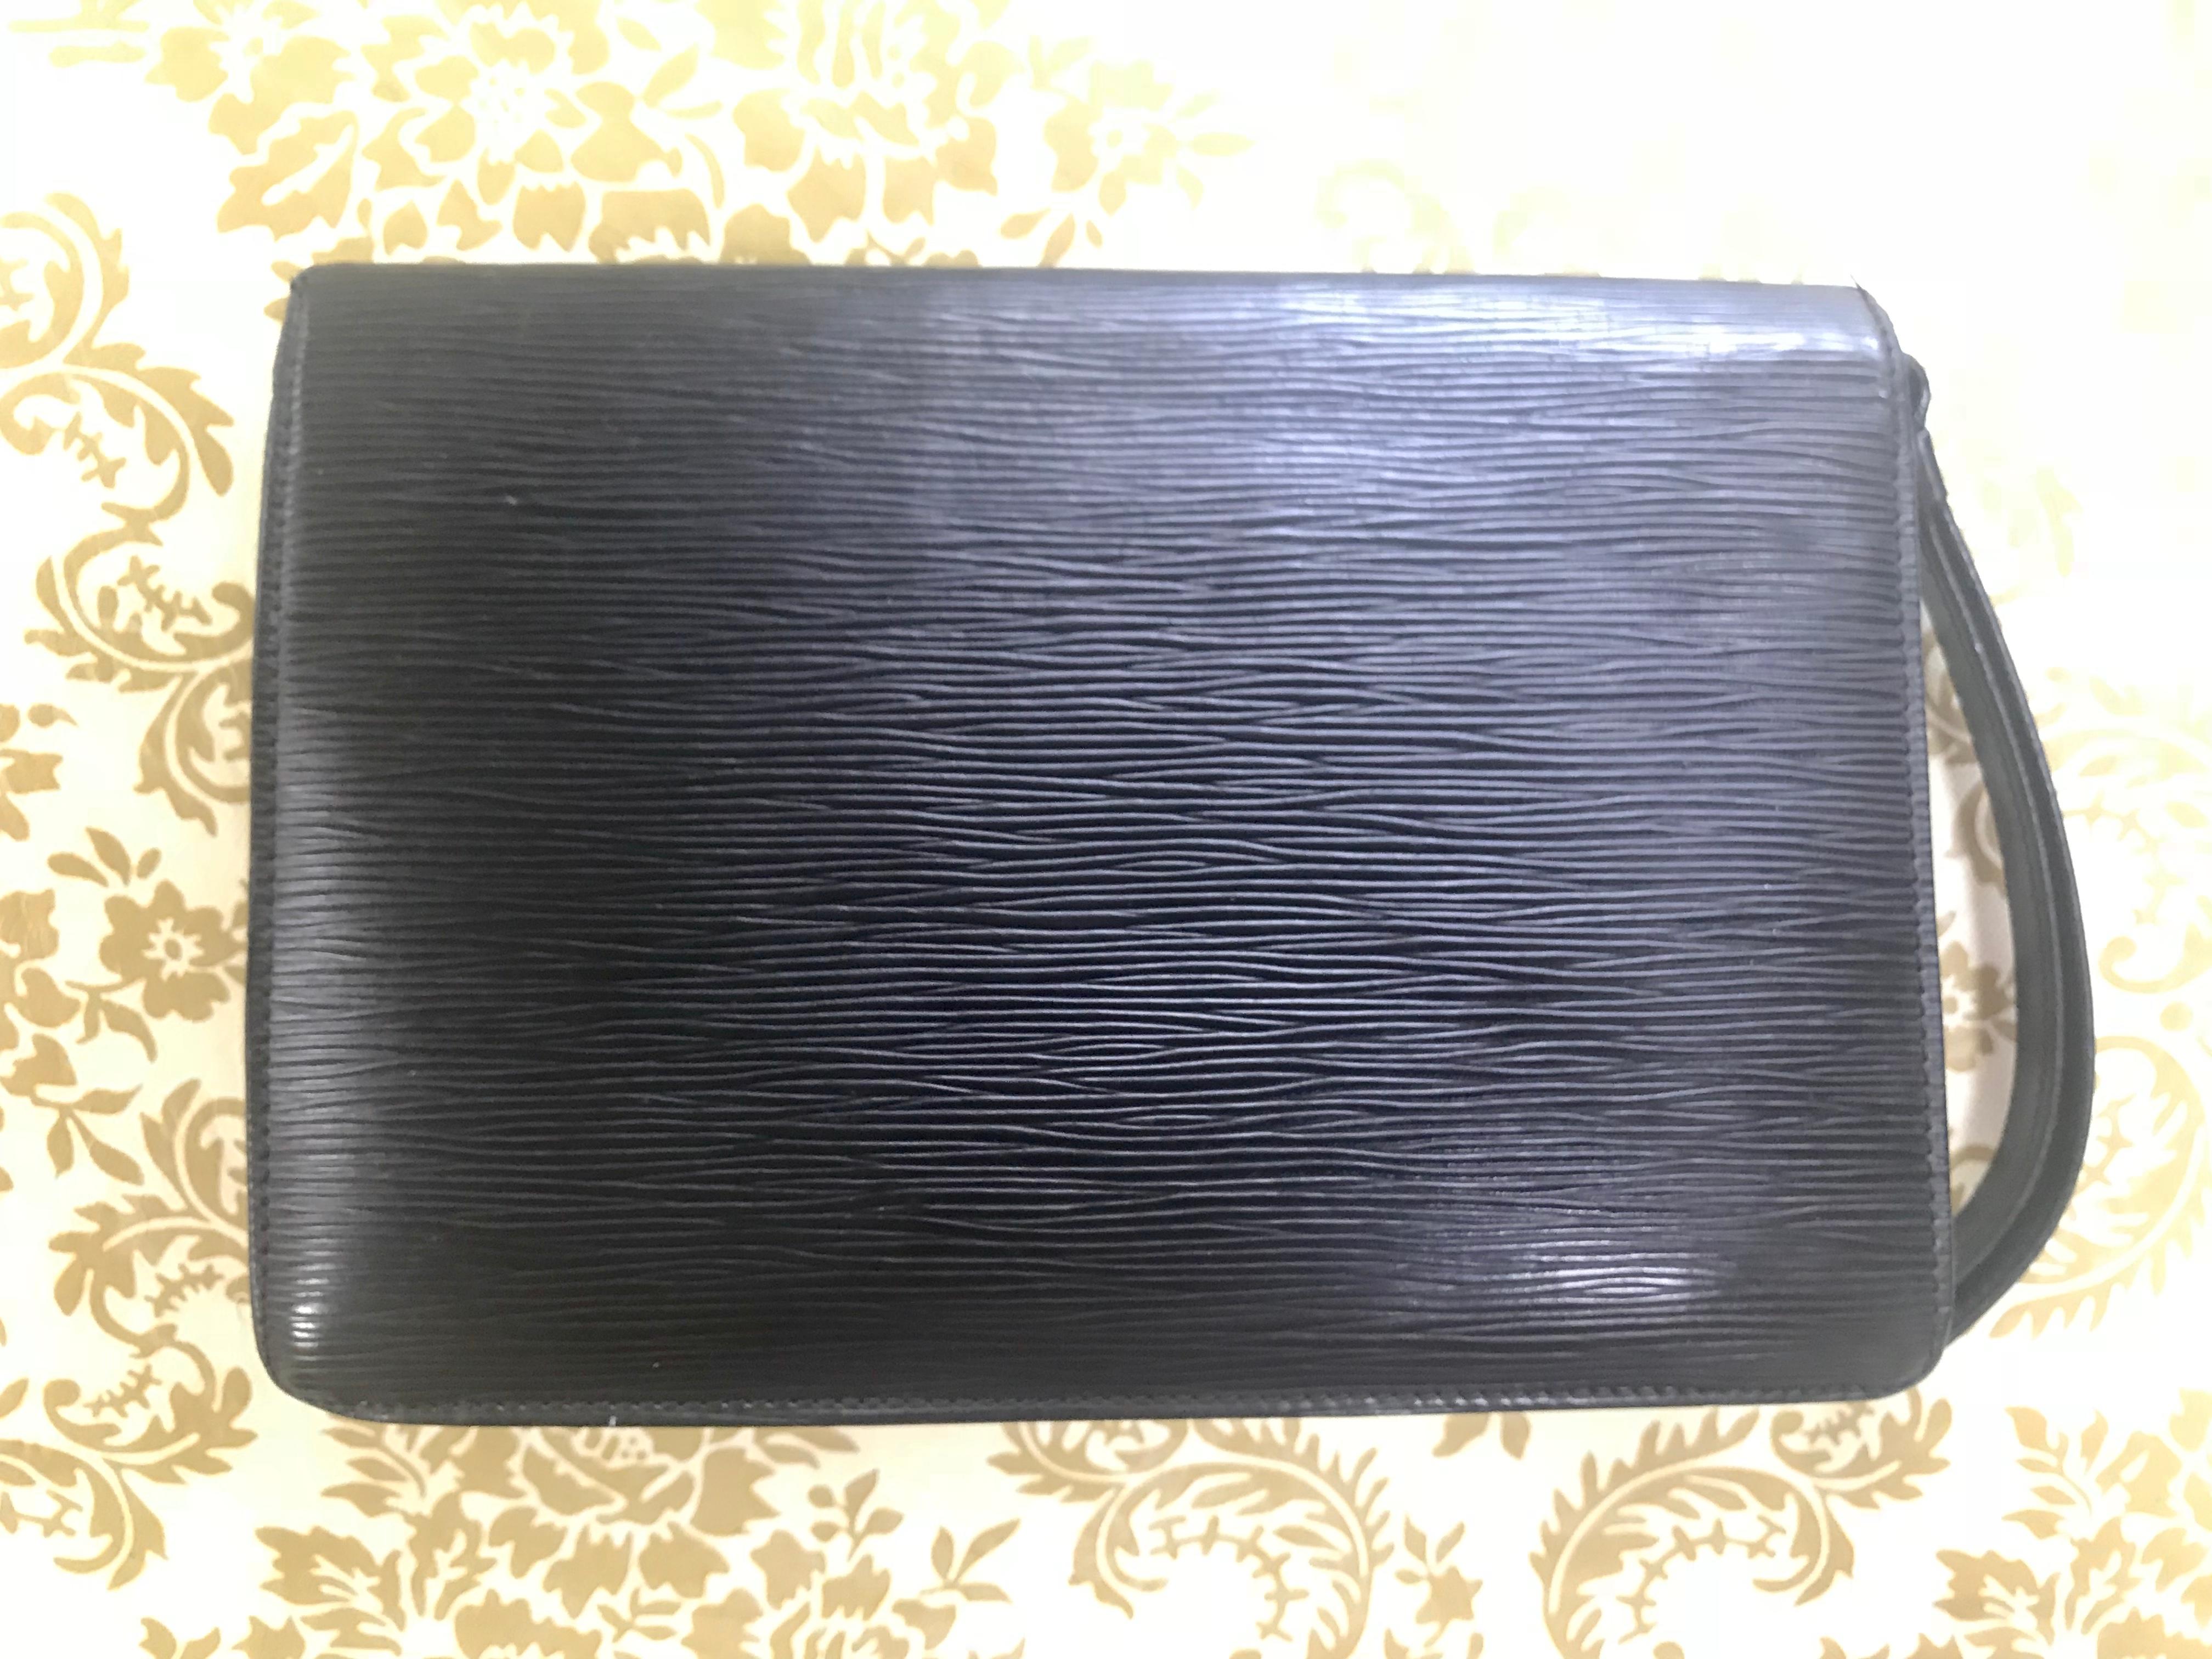 1980s. Vintage Louis Vuitton classic black epi leather wristlet clutch bag, purse with gold tone brass closure. 
Unisex and daily use bag.

Introducing one of the most classic vintage pieces from Louis Vuitton in the 80's, black epi leather clutch